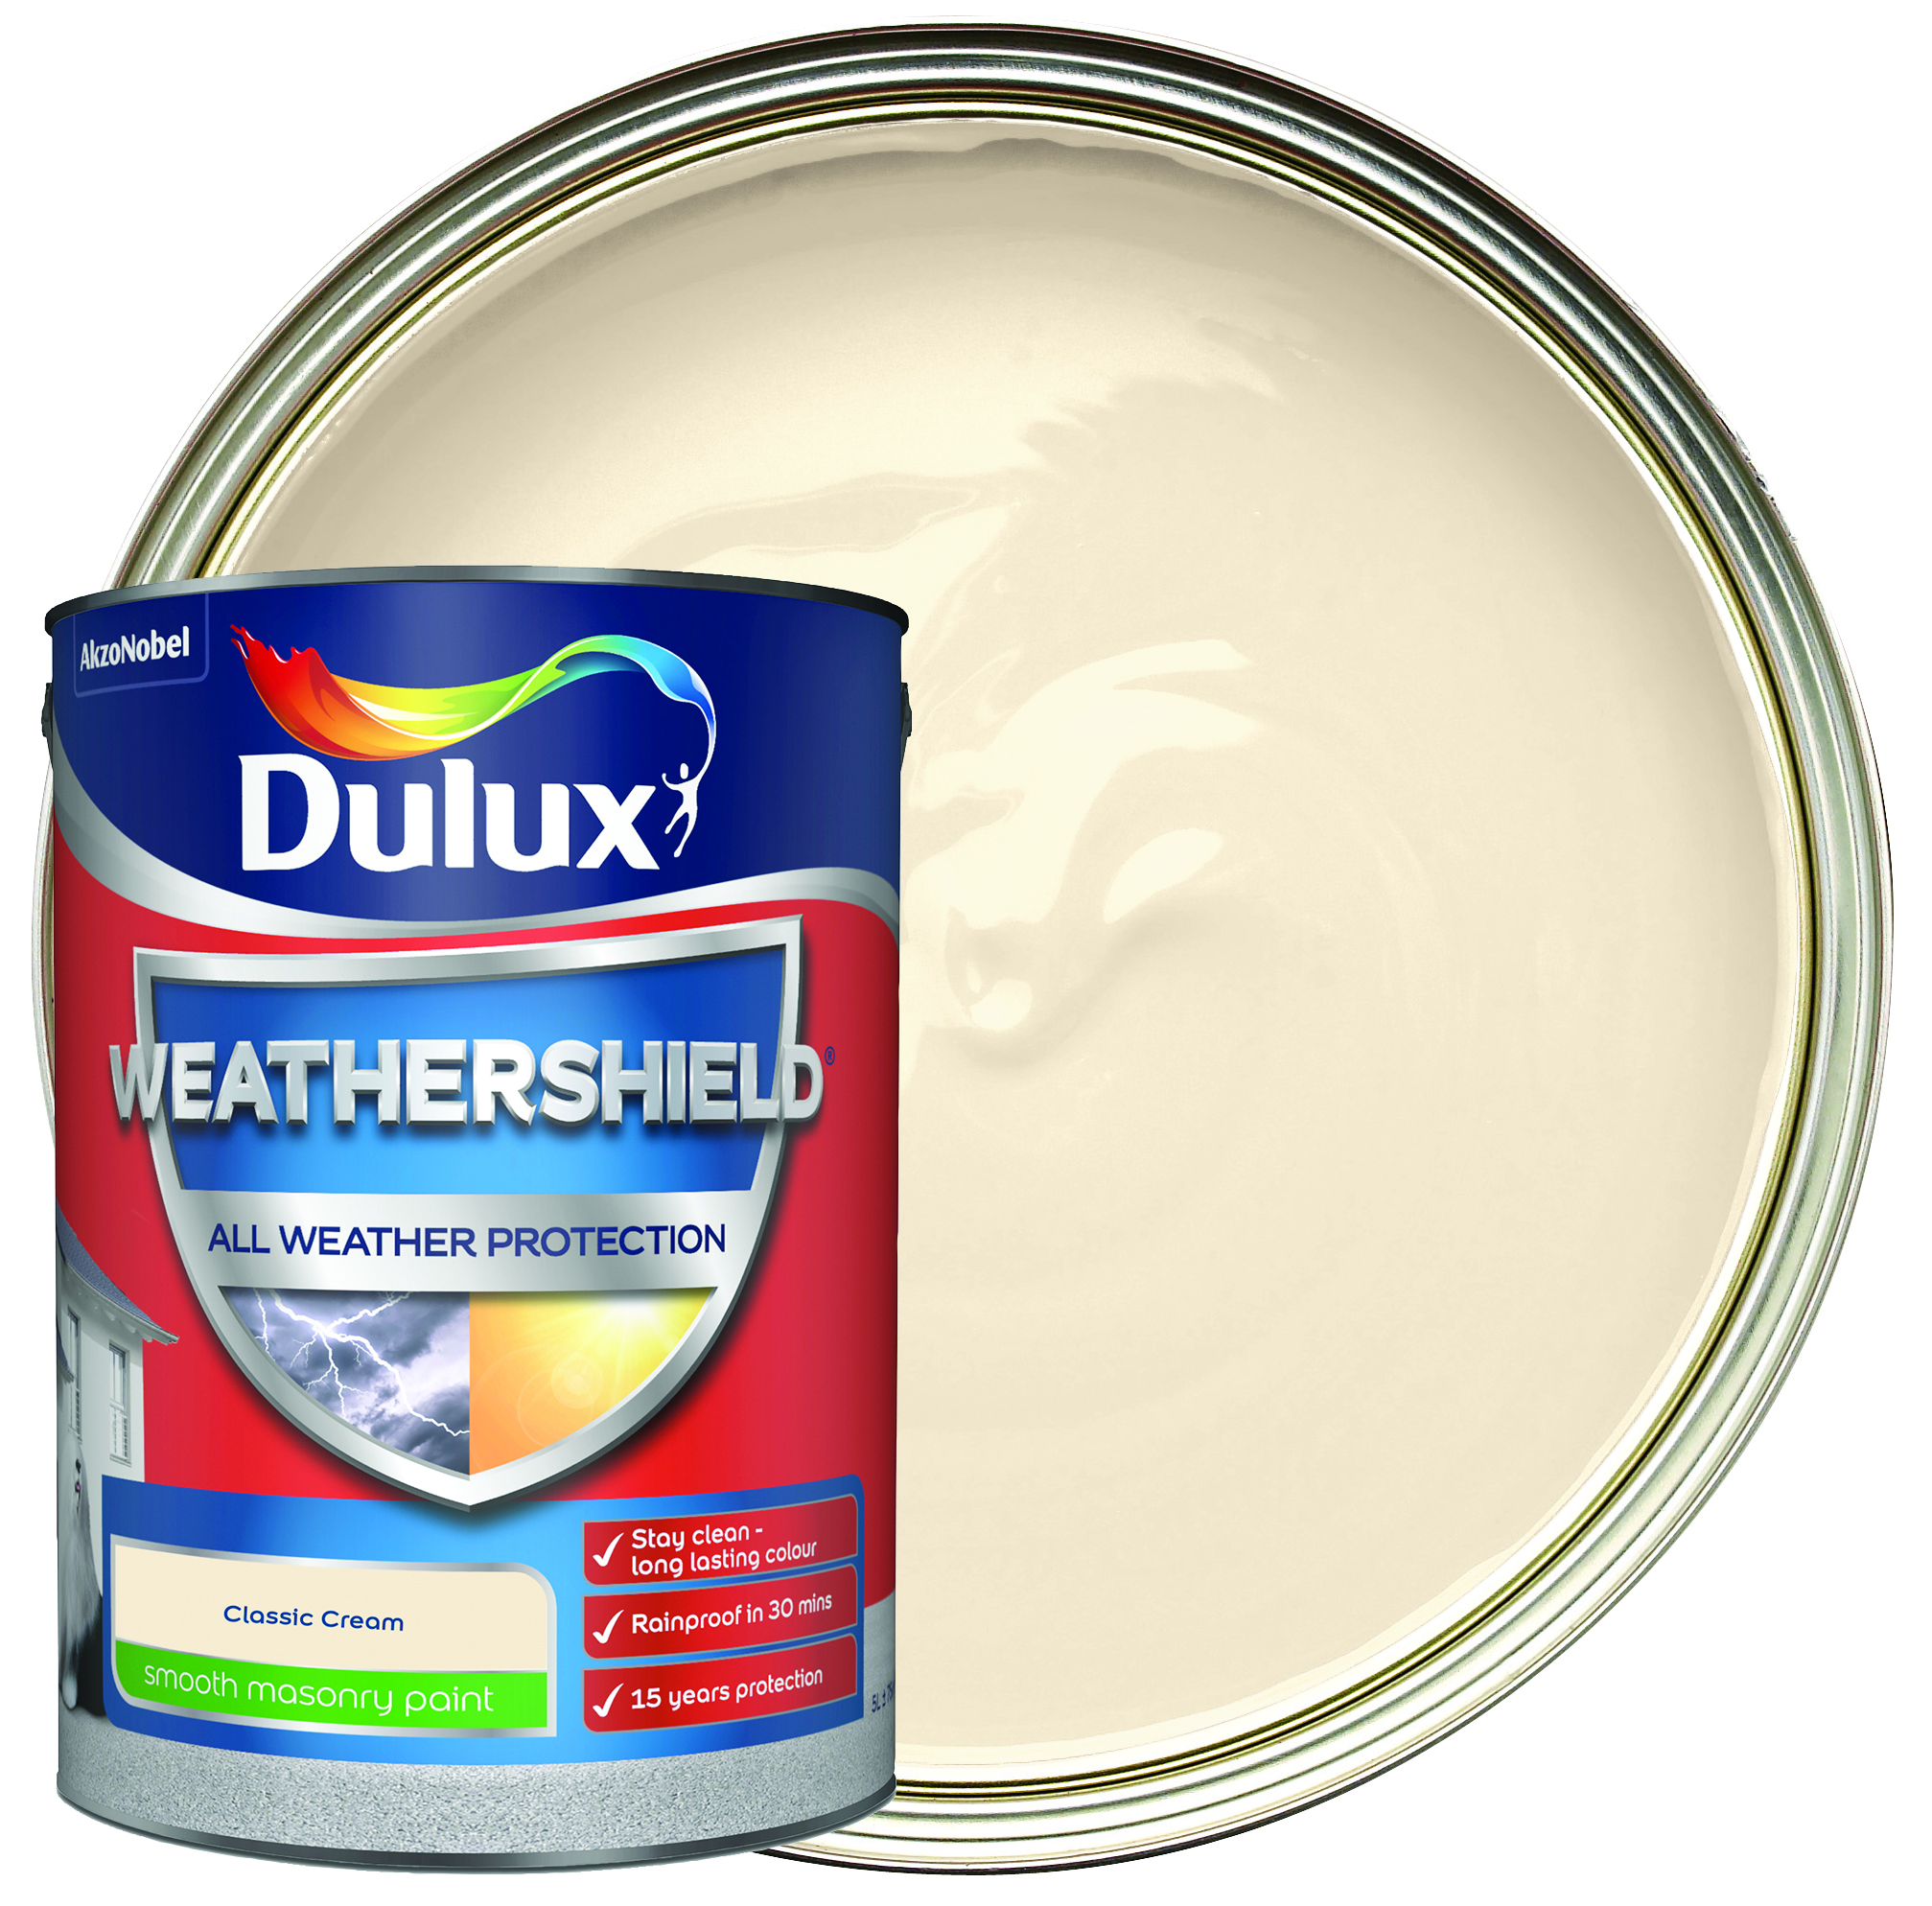 Image of Dulux Weathershield All Weather Purpose Smooth Paint - Classic Cream - 5L